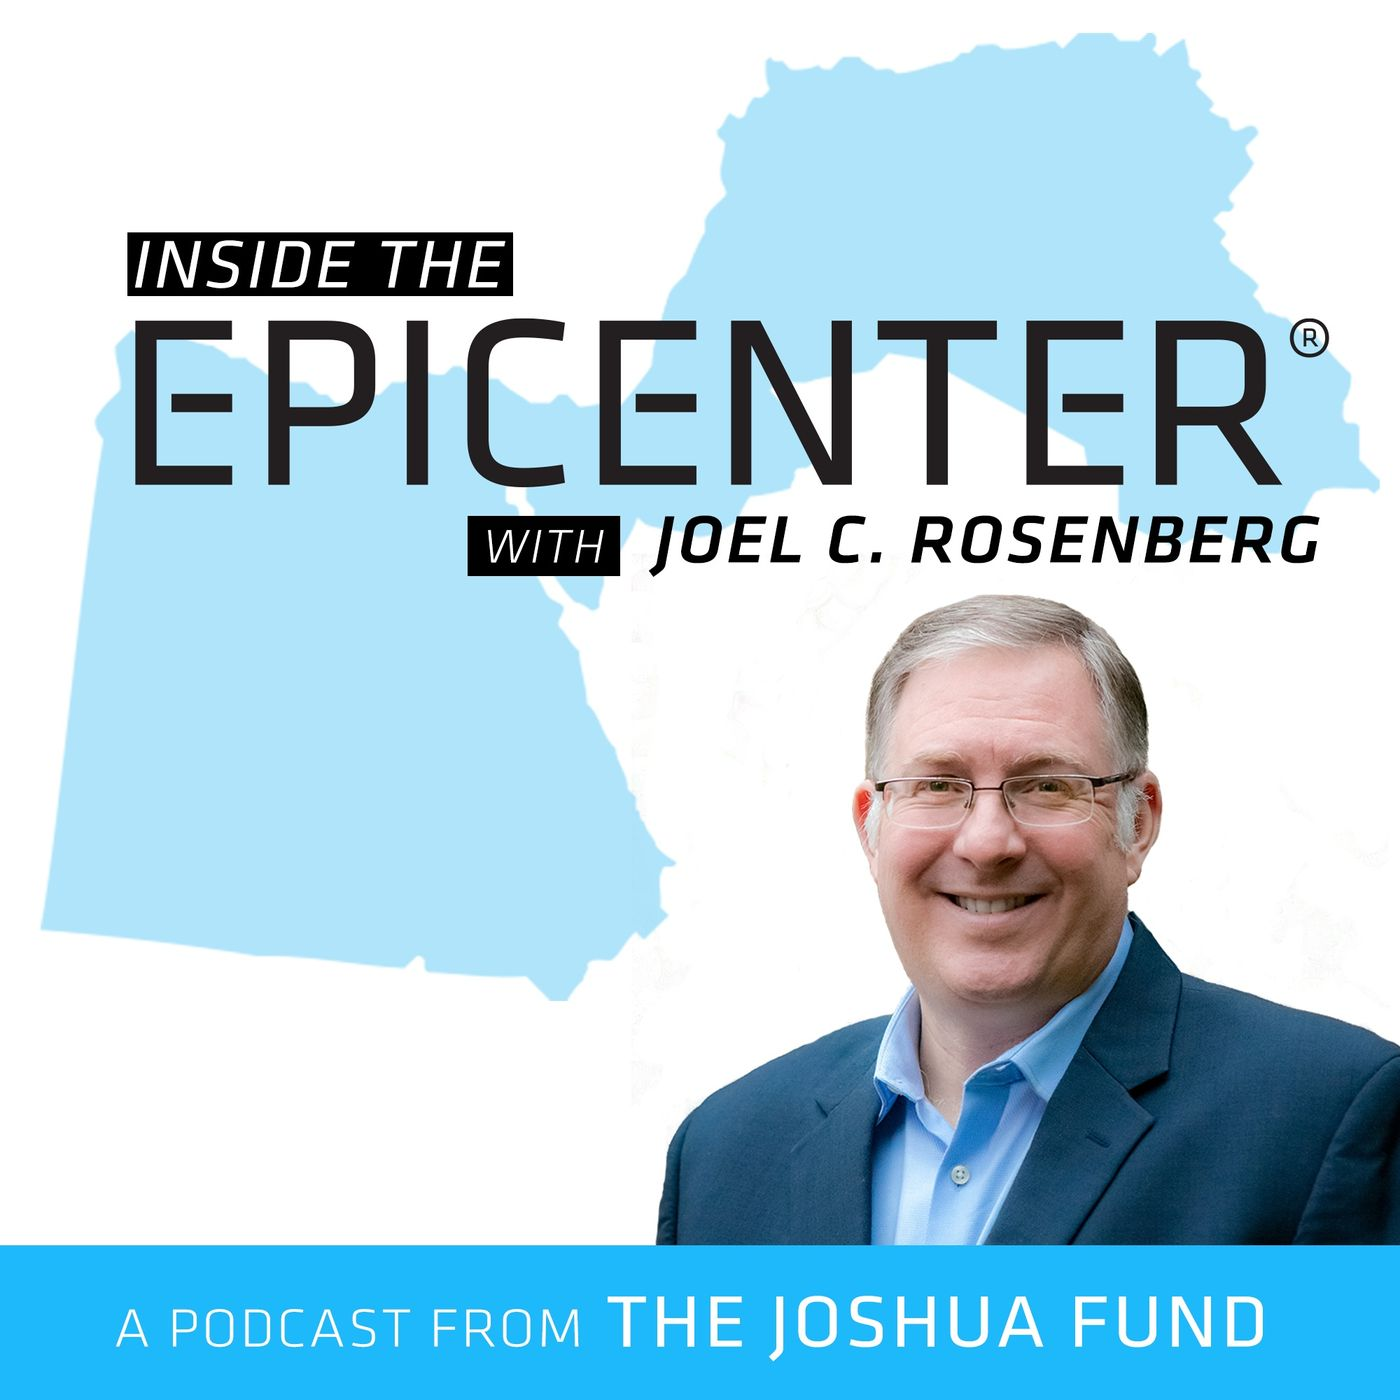 Who Exactly Is Joel Rosenberg and What Is The Joshua Fund That He & His Wife Founded? #1